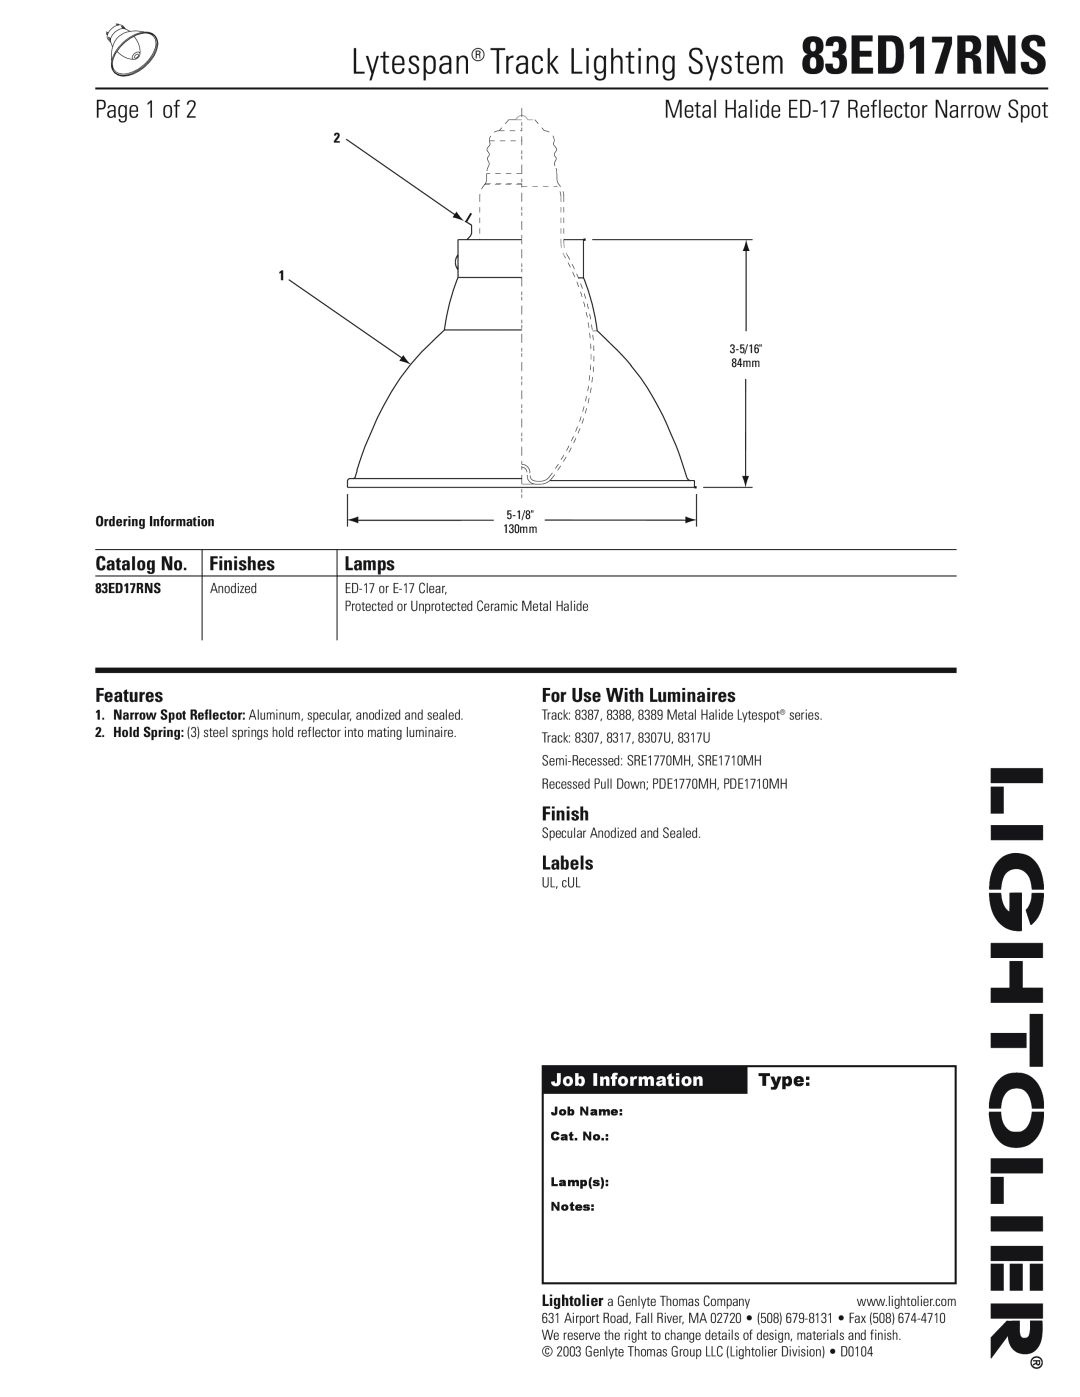 Lightolier manual Job Information, Type, Lytespan Track Lighting System 83ED17RNS, Page 1 of, Finishes, Lamps, Features 